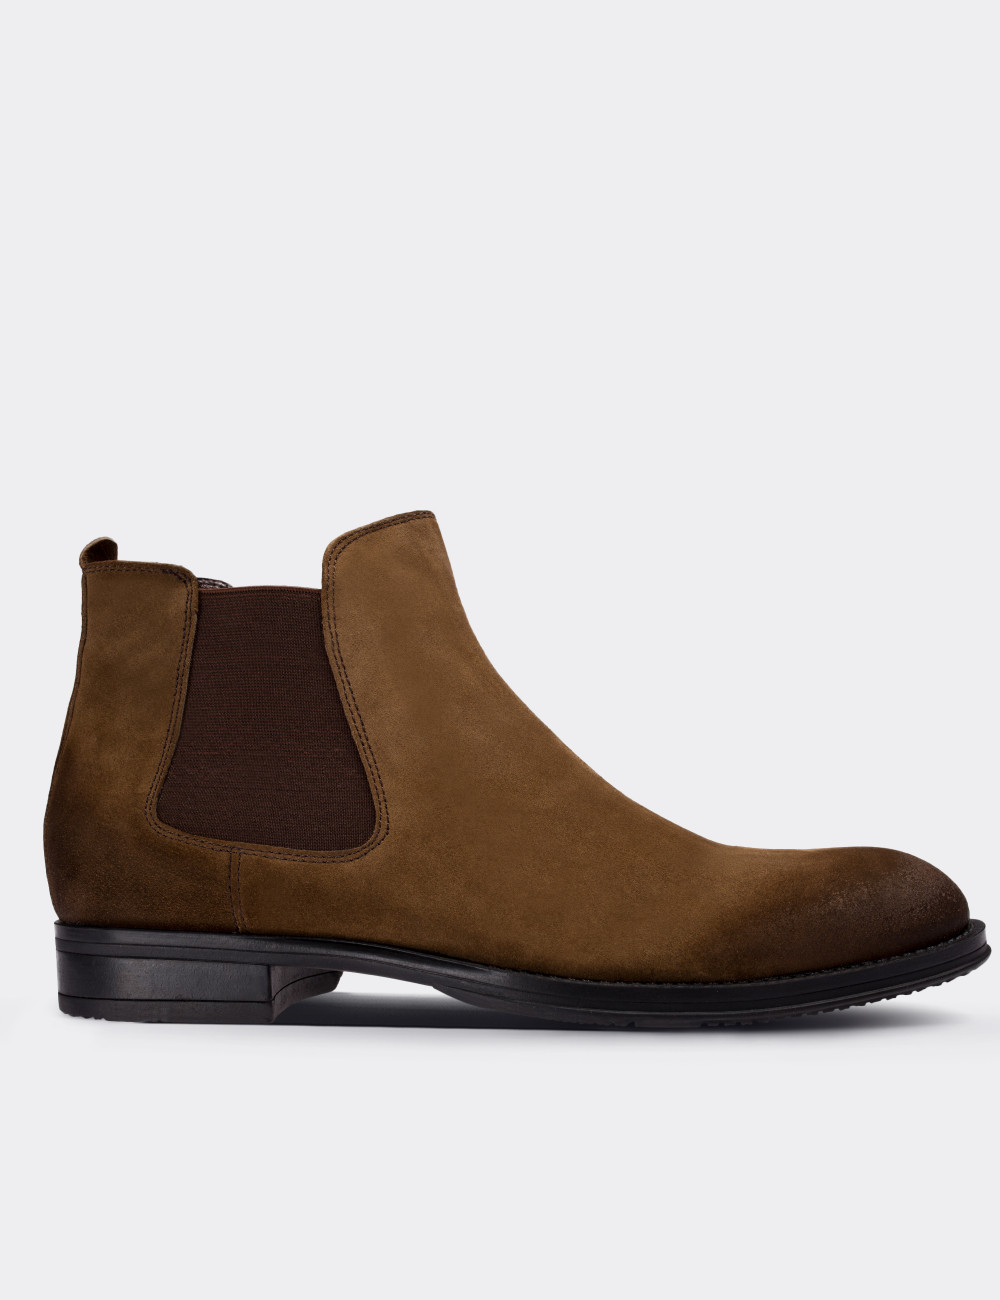 Tan Suede Leather Chelsea Boots - 01620MTBAC03